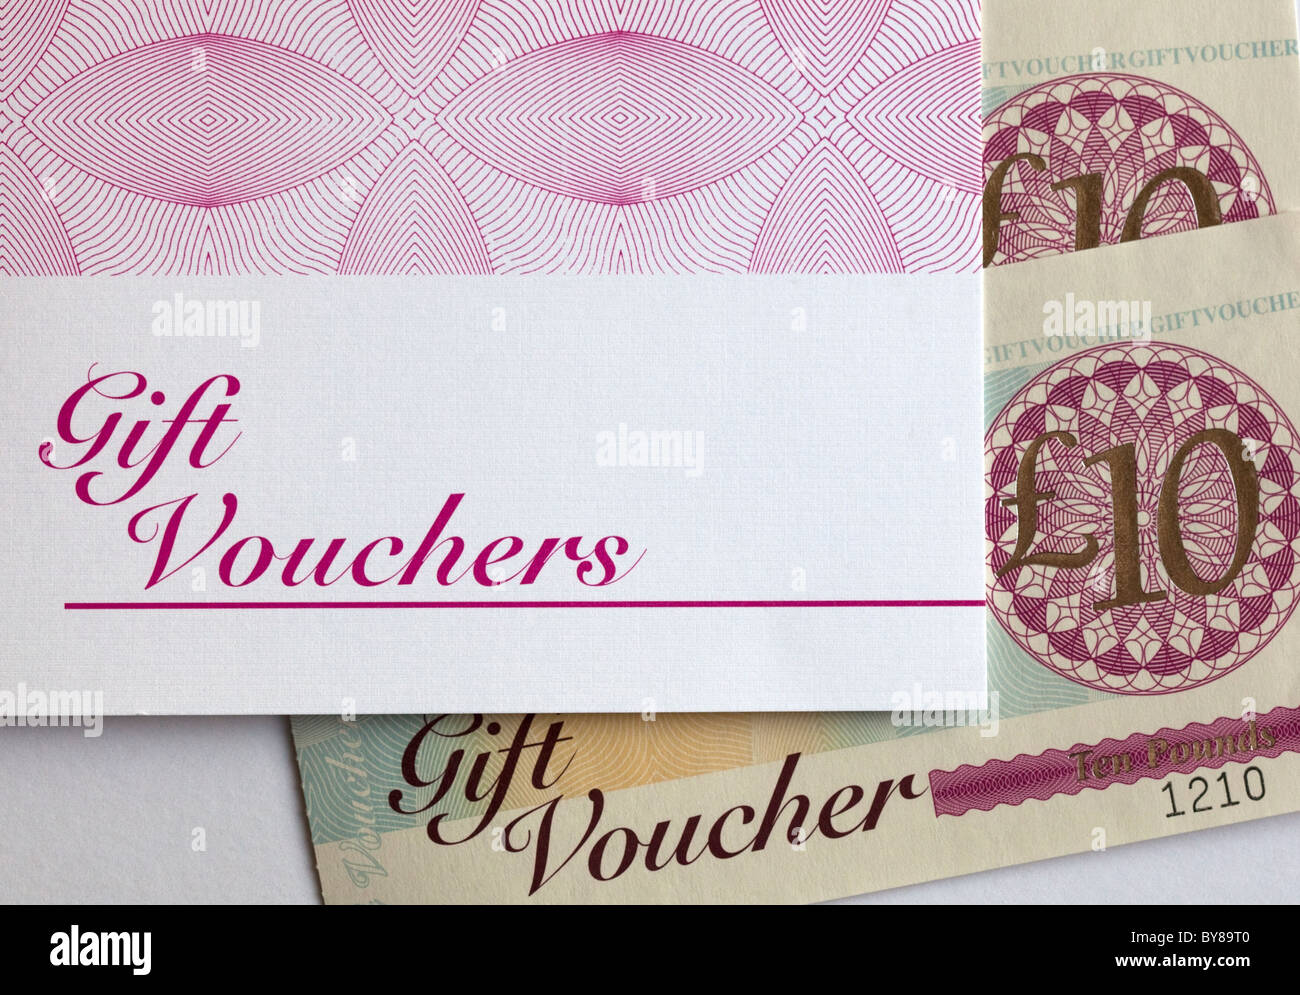 Gift Vouchers in sterling currency UK, Europe Stock Photo